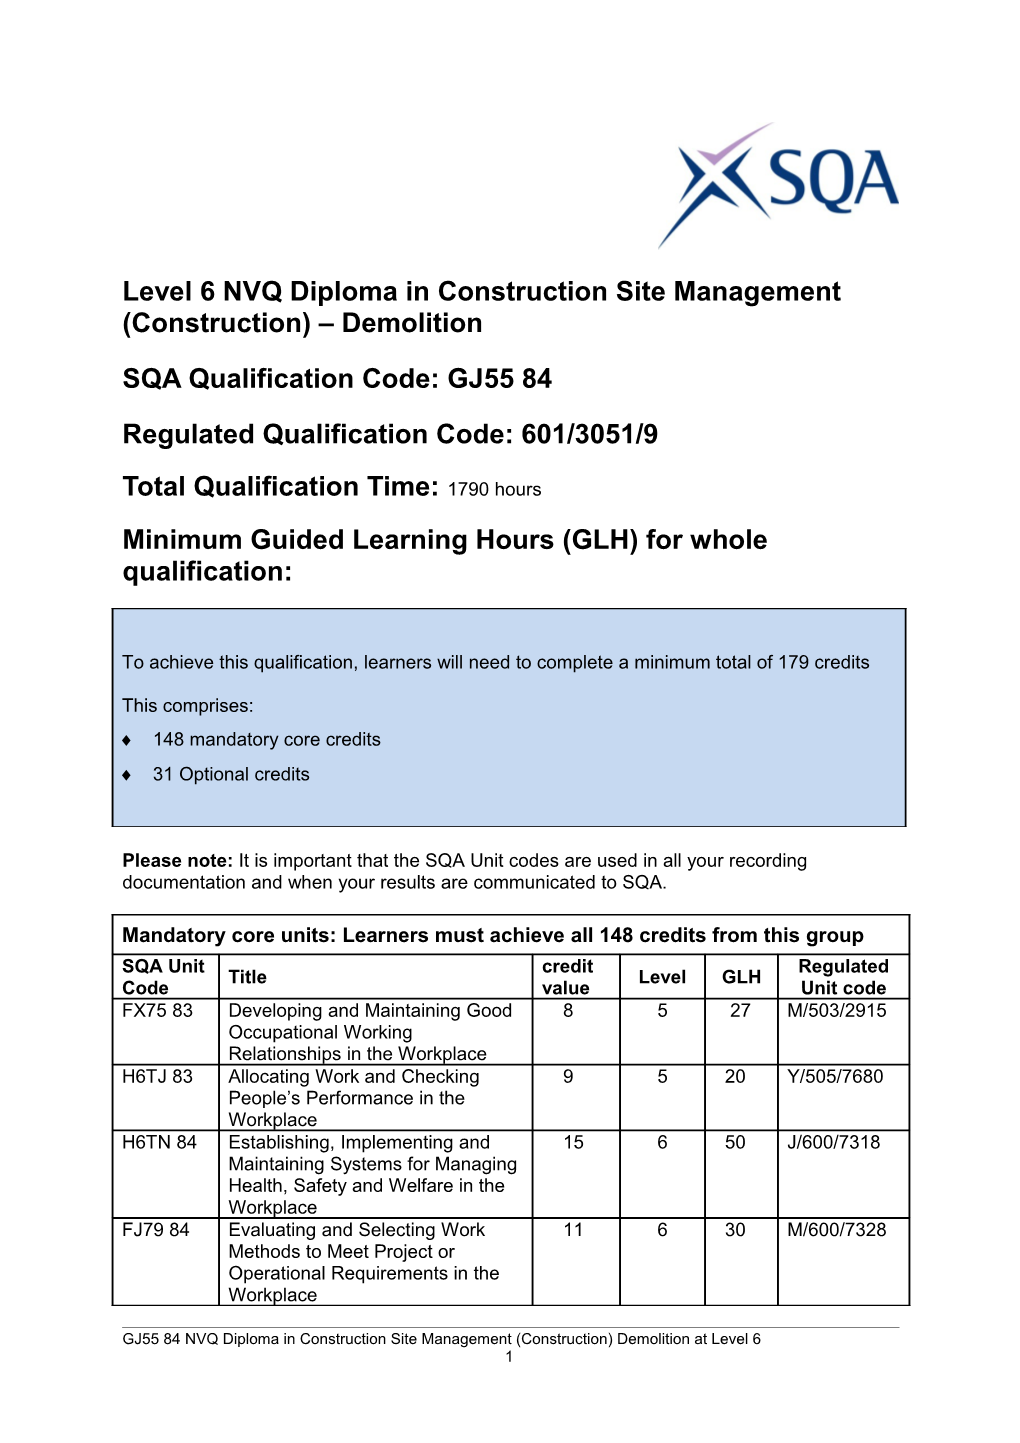 Level 6NVQ Diploma in Construction Site Management(Construction) Demolition